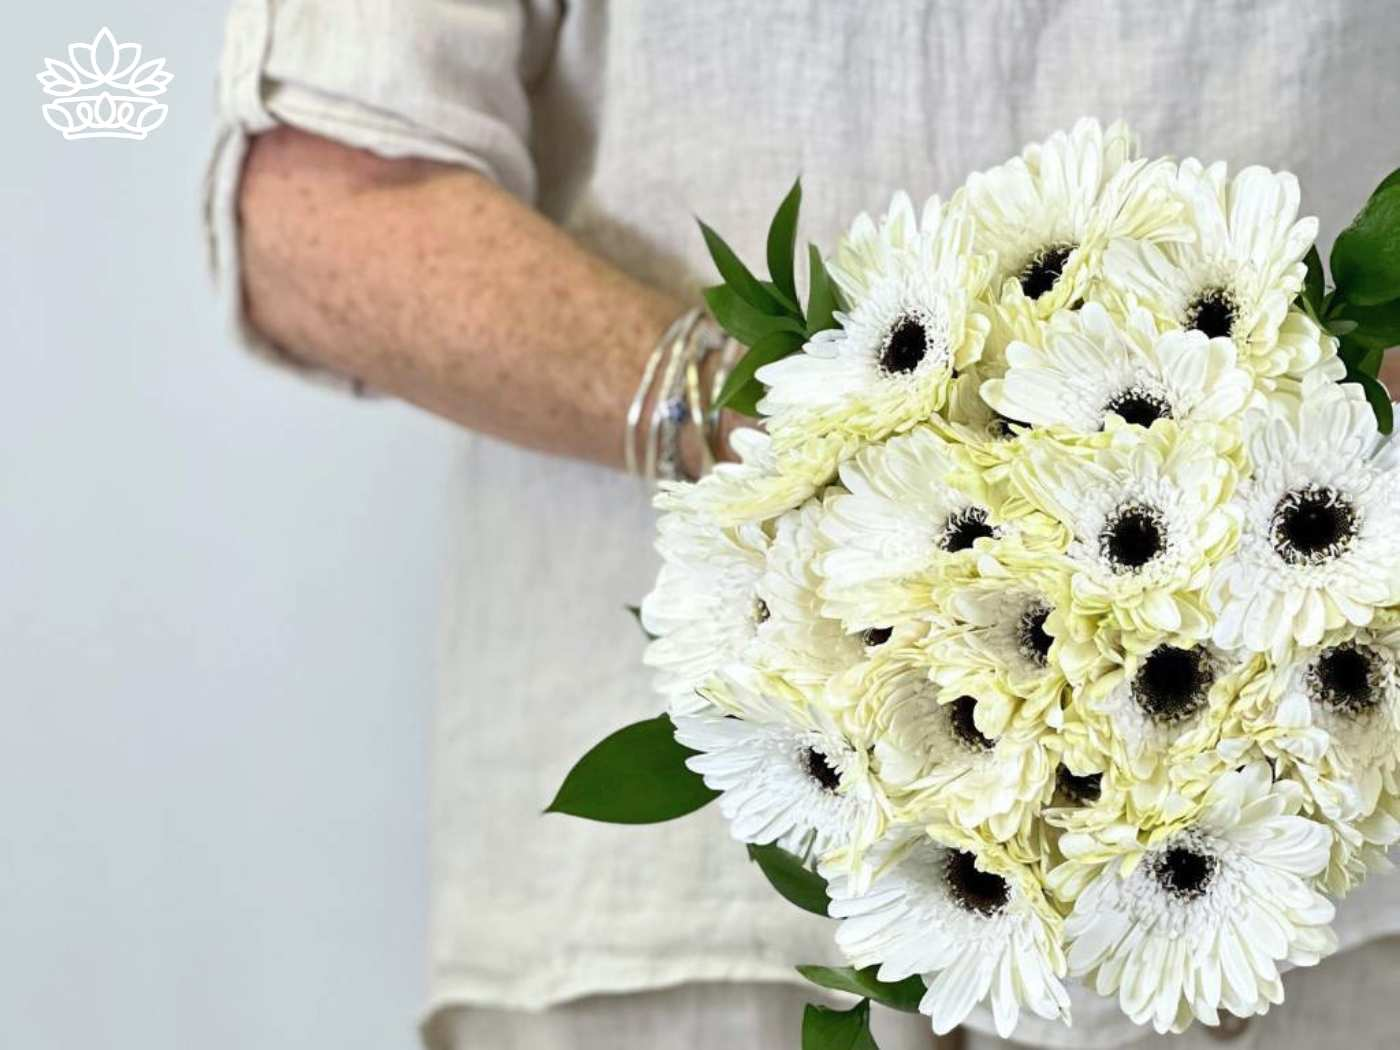 Close-up of a woman holding a bouquet of fresh white gerberas with dark centers, symbolizing purity and innocence. Gerberas Collection. Delivered with Heart. Fabulous Flowers and Gifts.